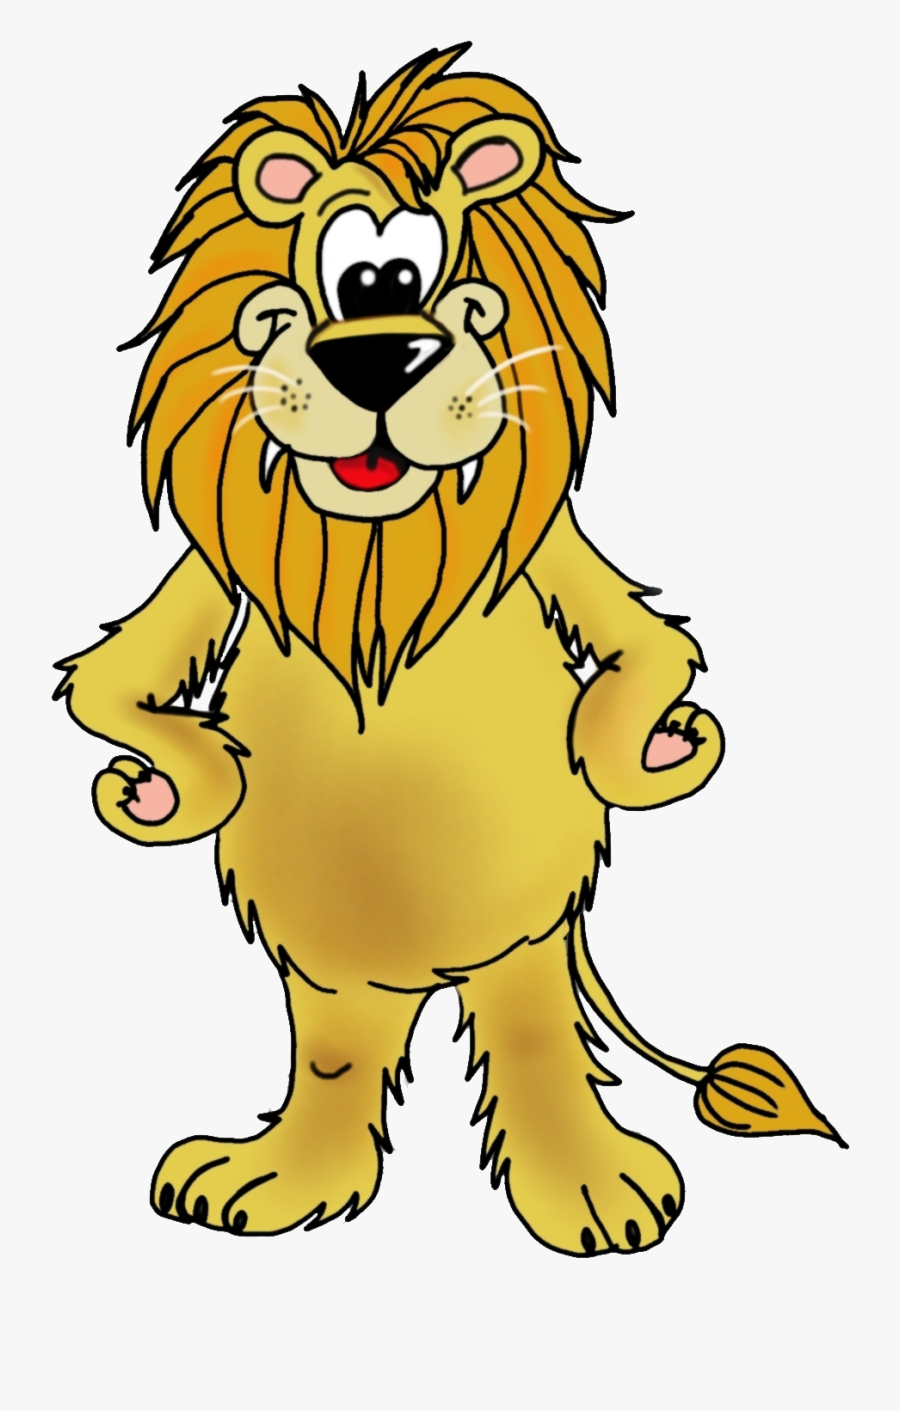 Free Custom Drawn Clipart By Jeanette Baker With A - Free Lion Clip Art, Transparent Clipart